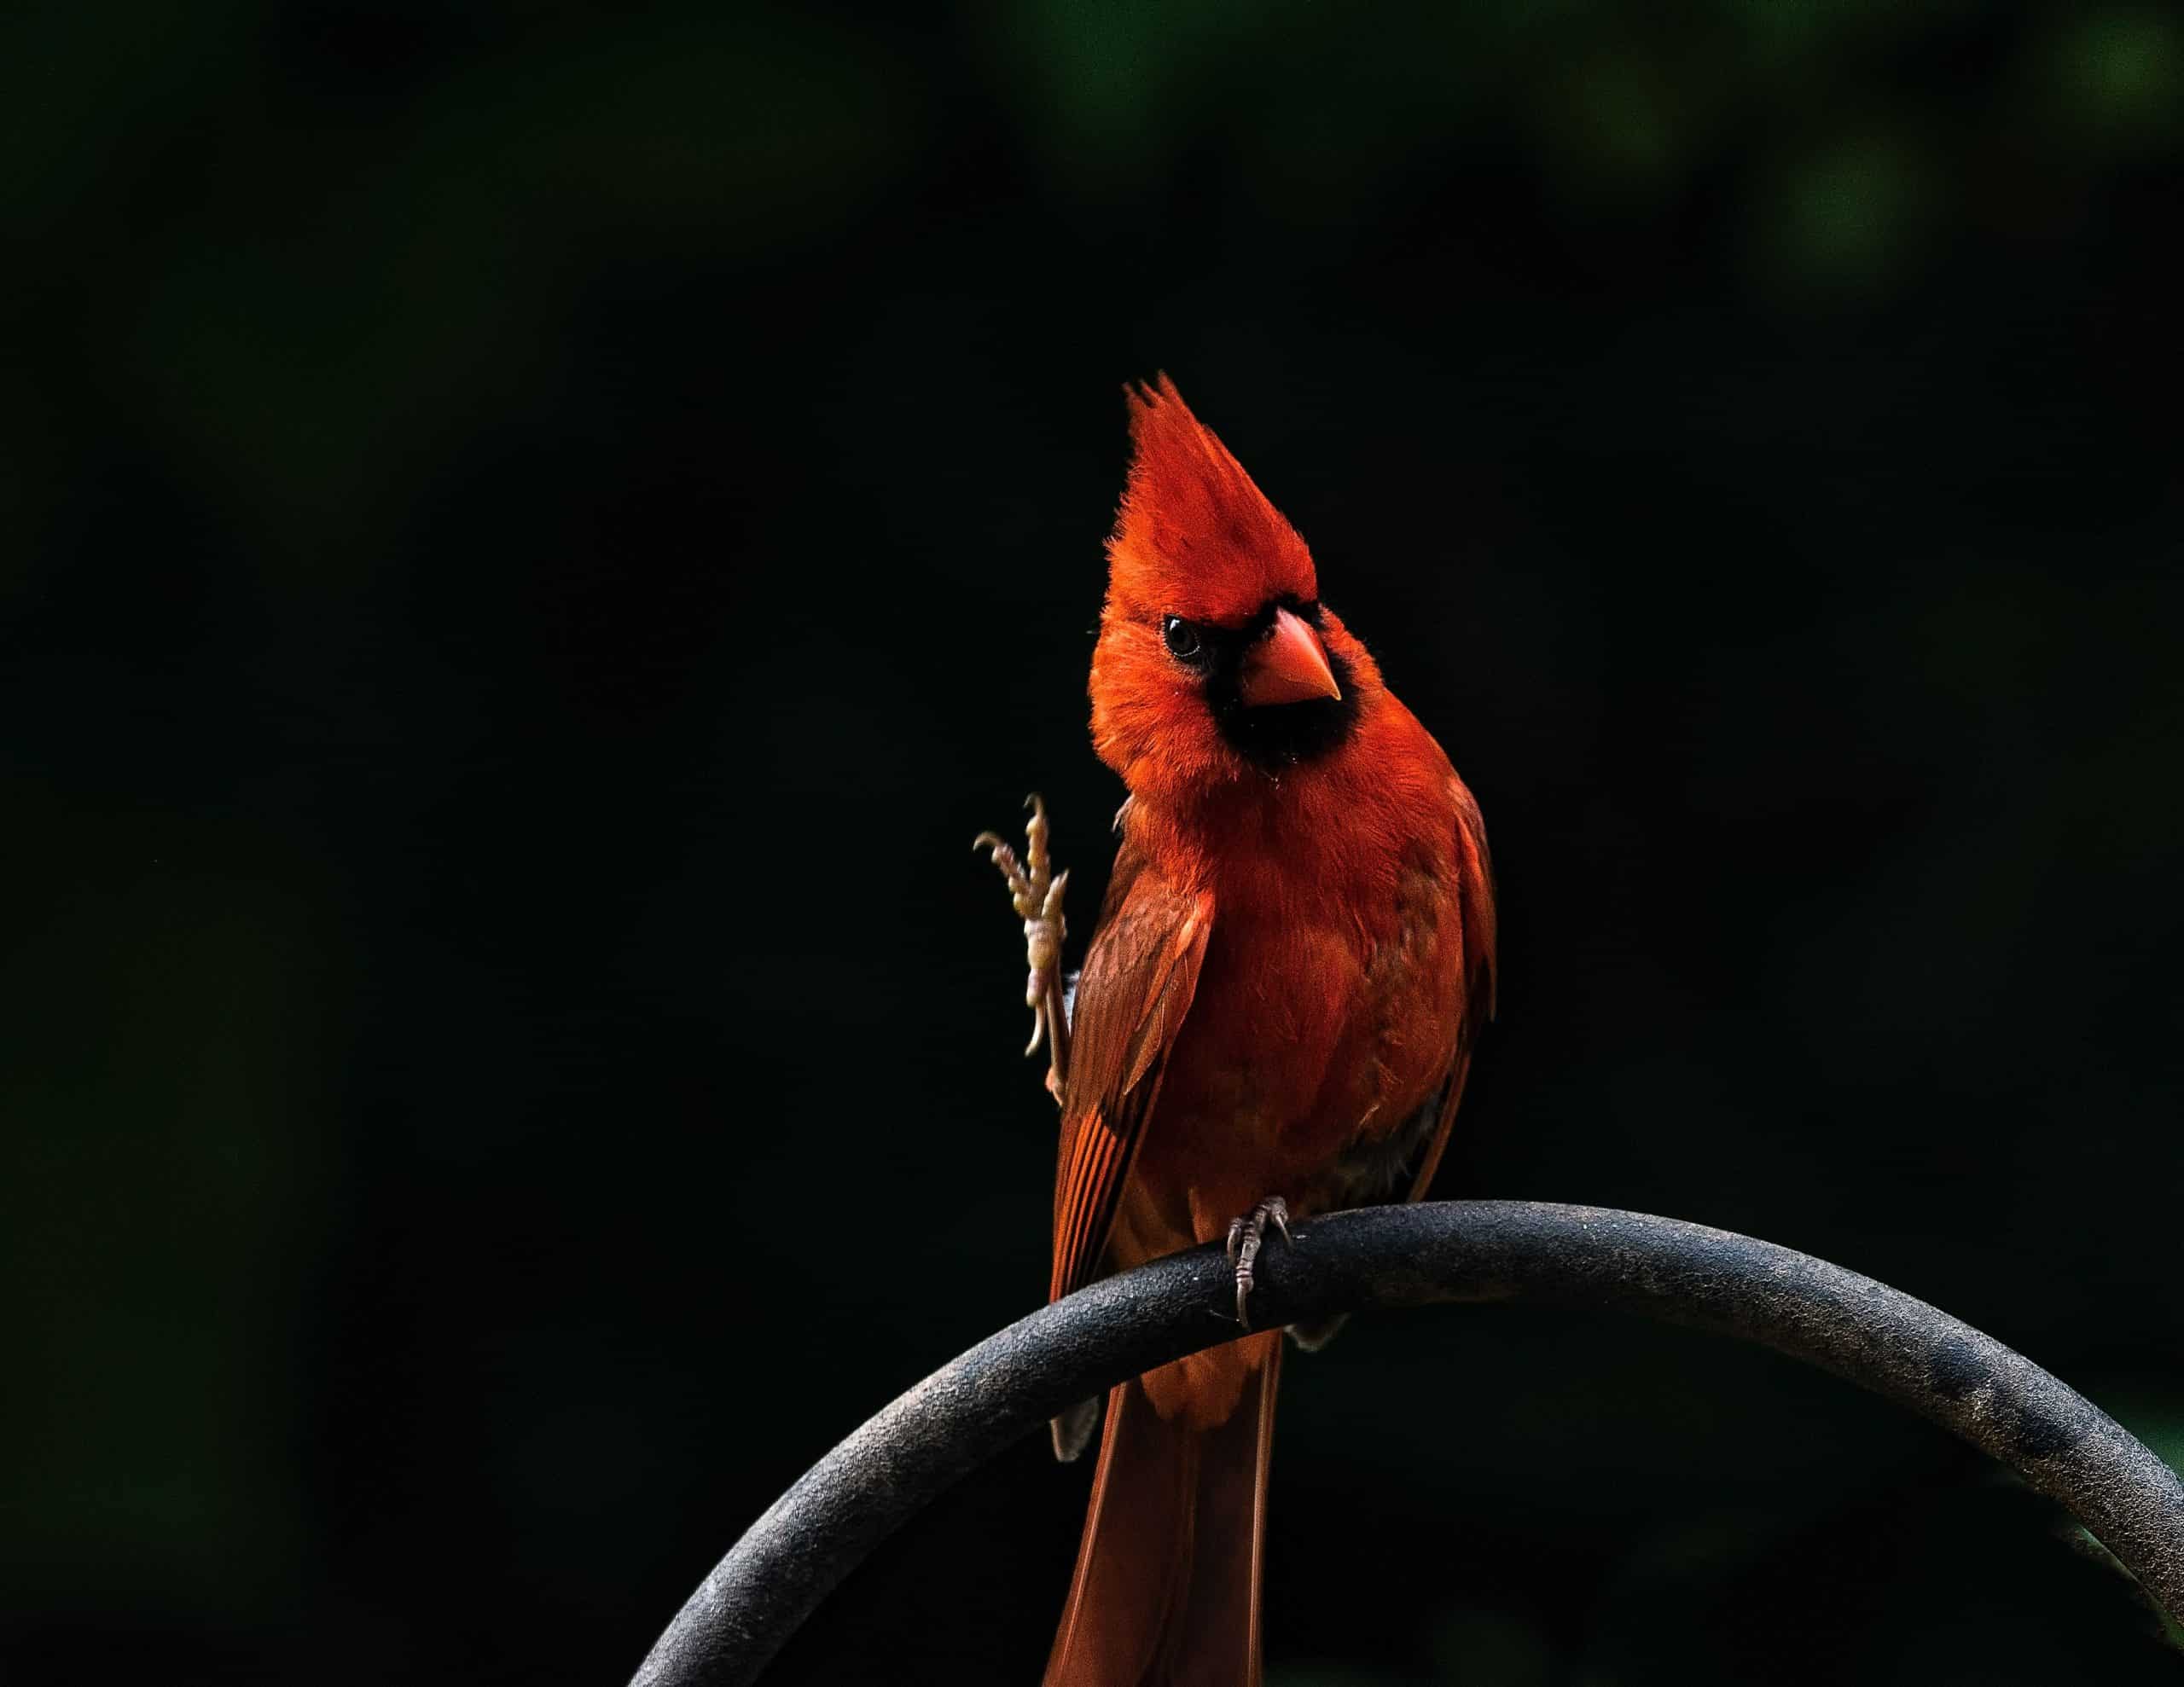 red cardinal on black rod depicting cardinal meaning